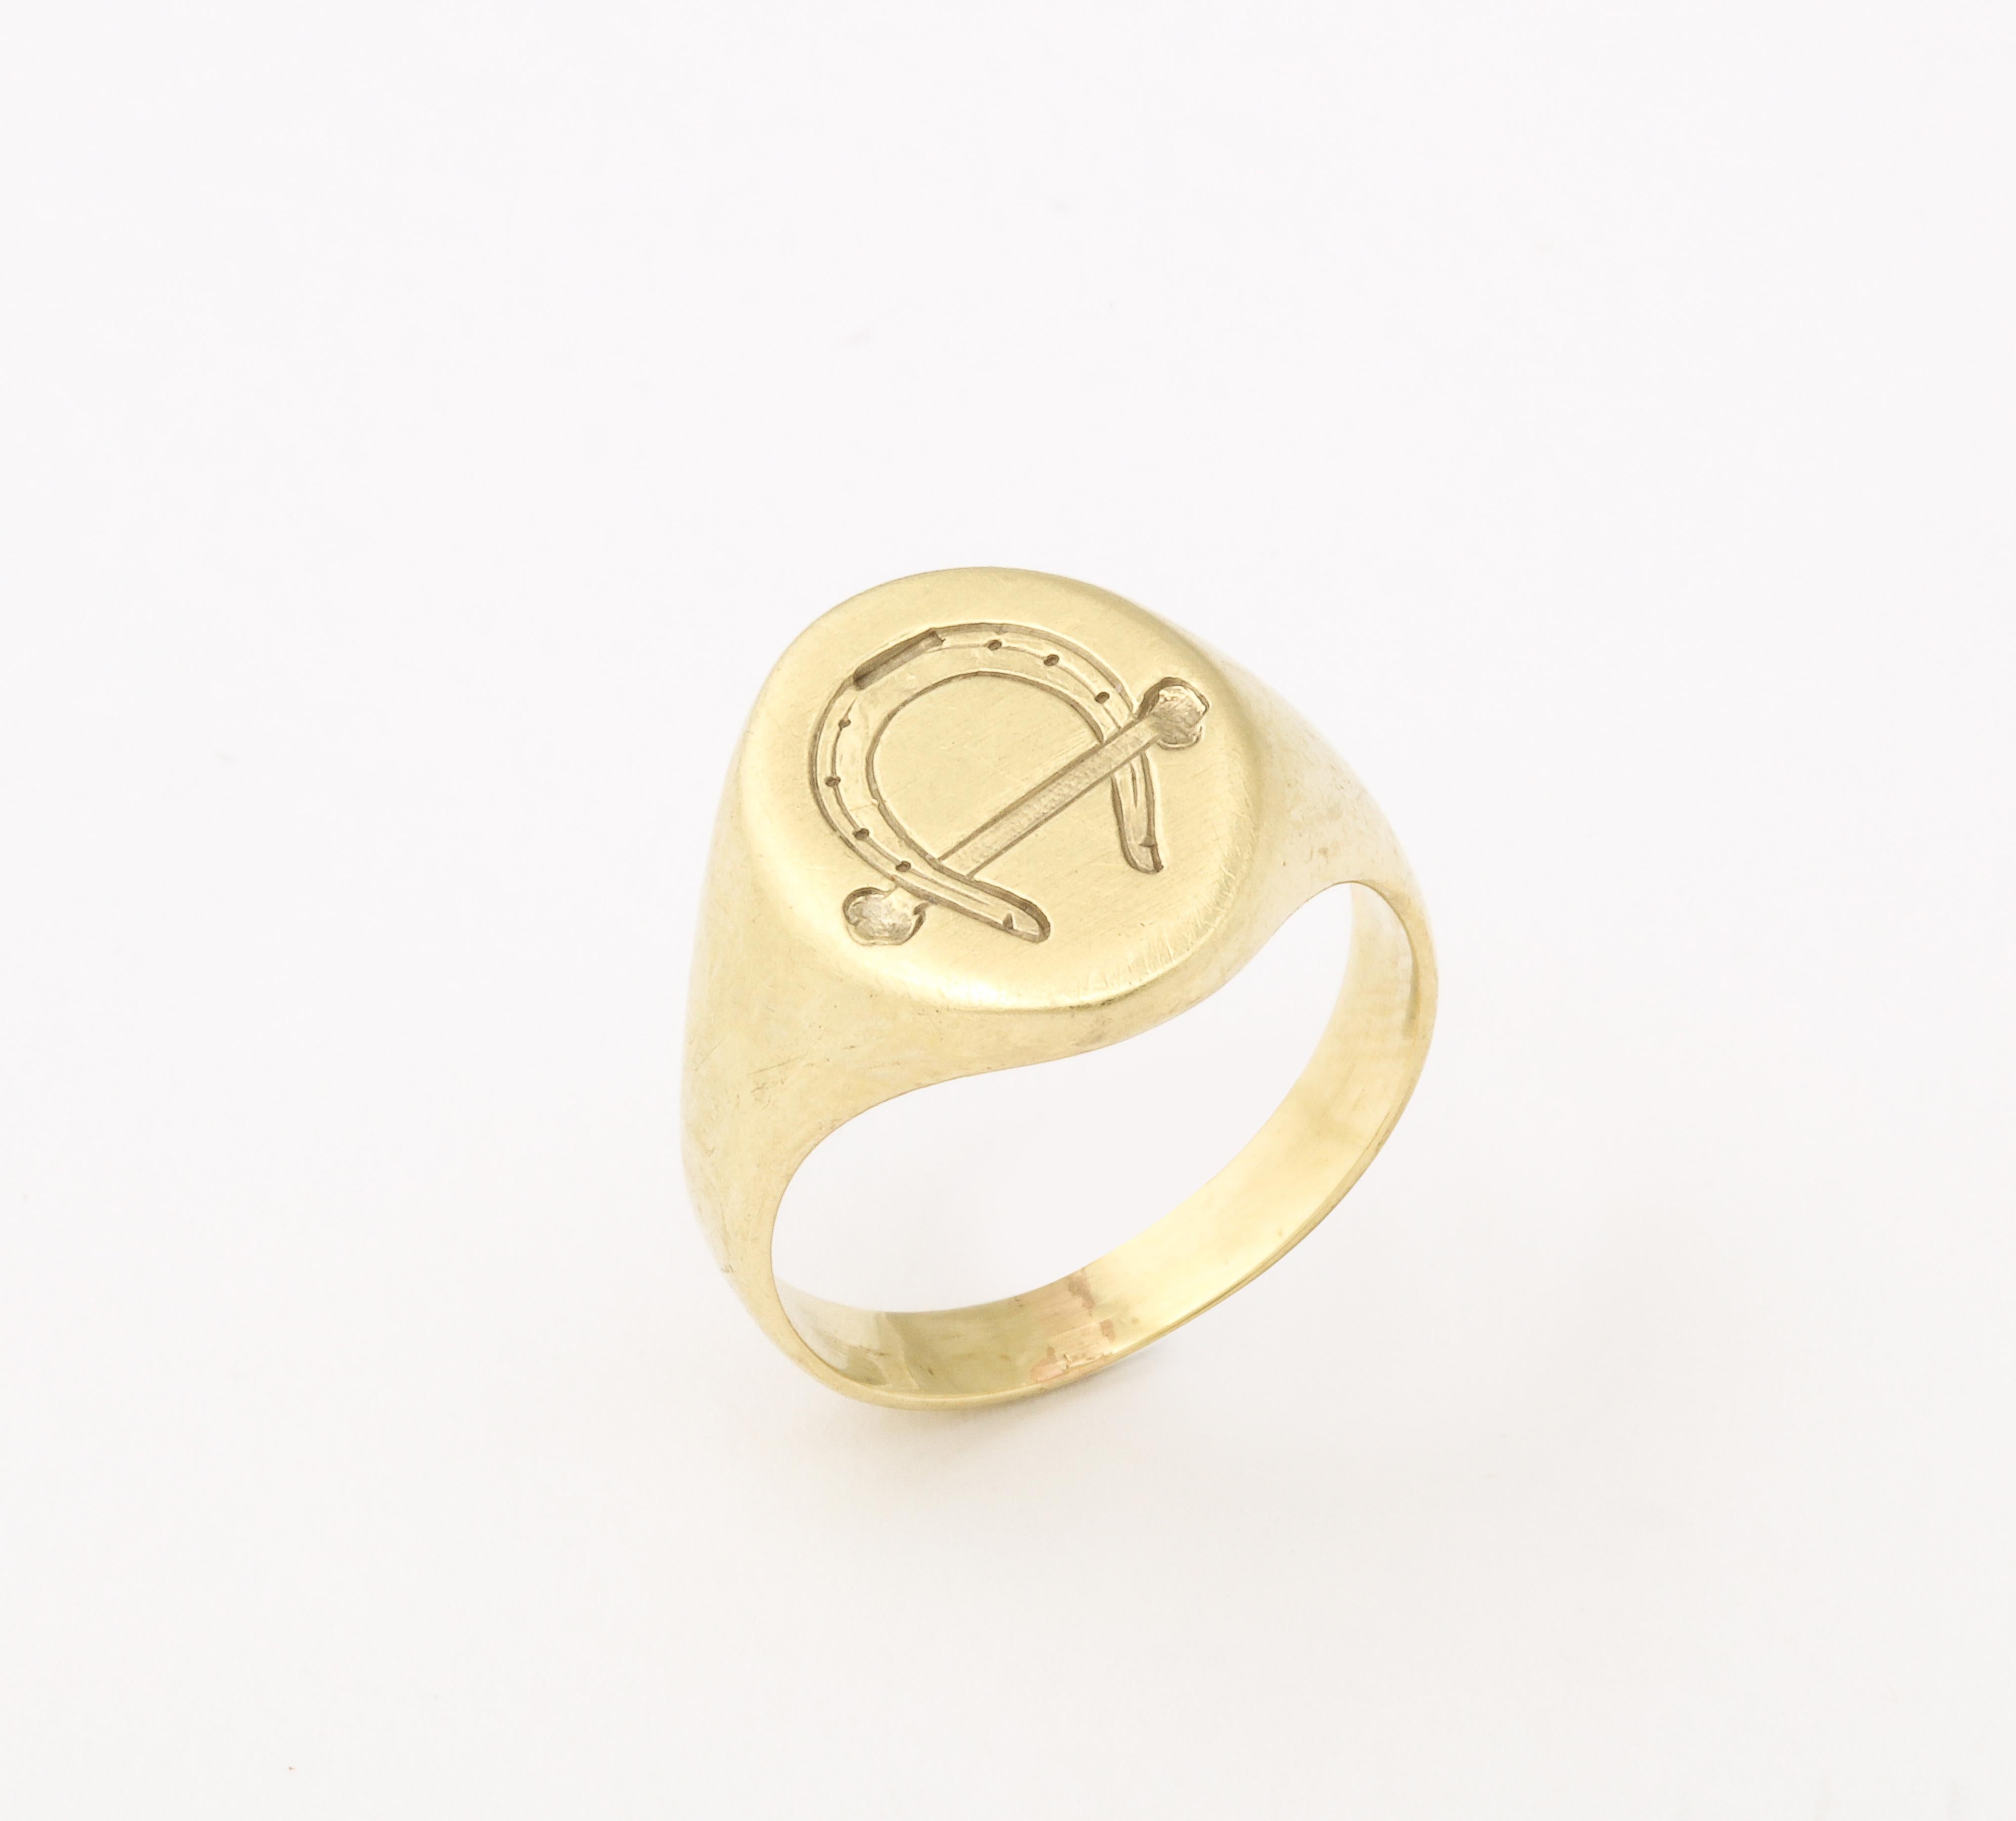 A Retro Equestrian or Lucky Signet Ring with Horseshoe and Crop 14 Kt Gold In Excellent Condition For Sale In Stamford, CT